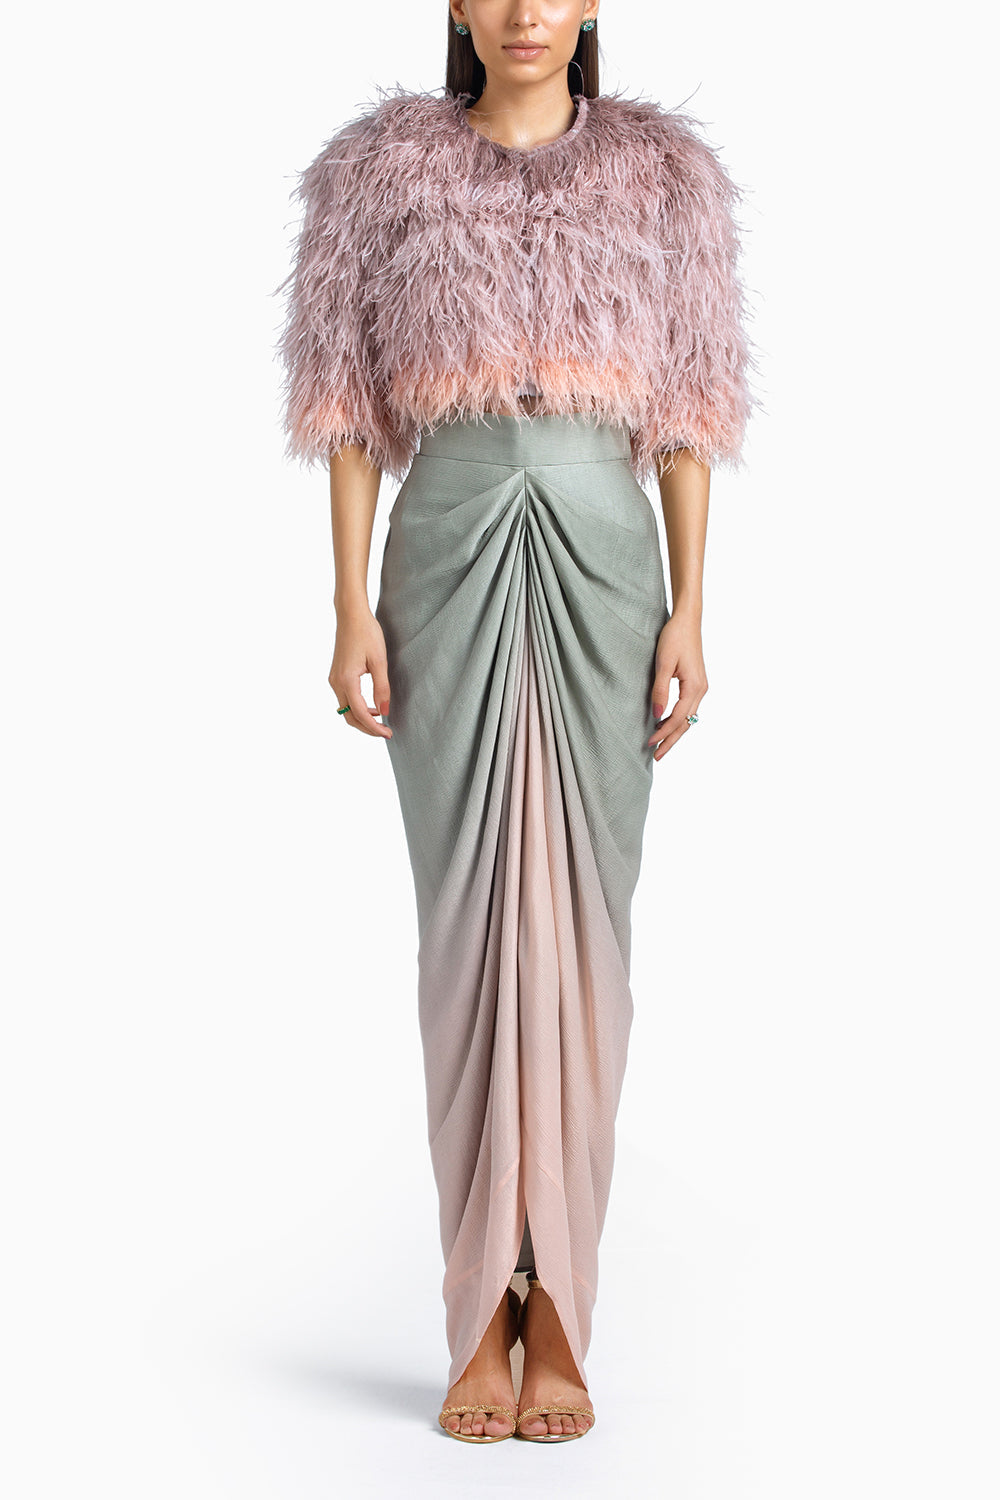 Stone To Salmon Pink Ombre Draped Skirt